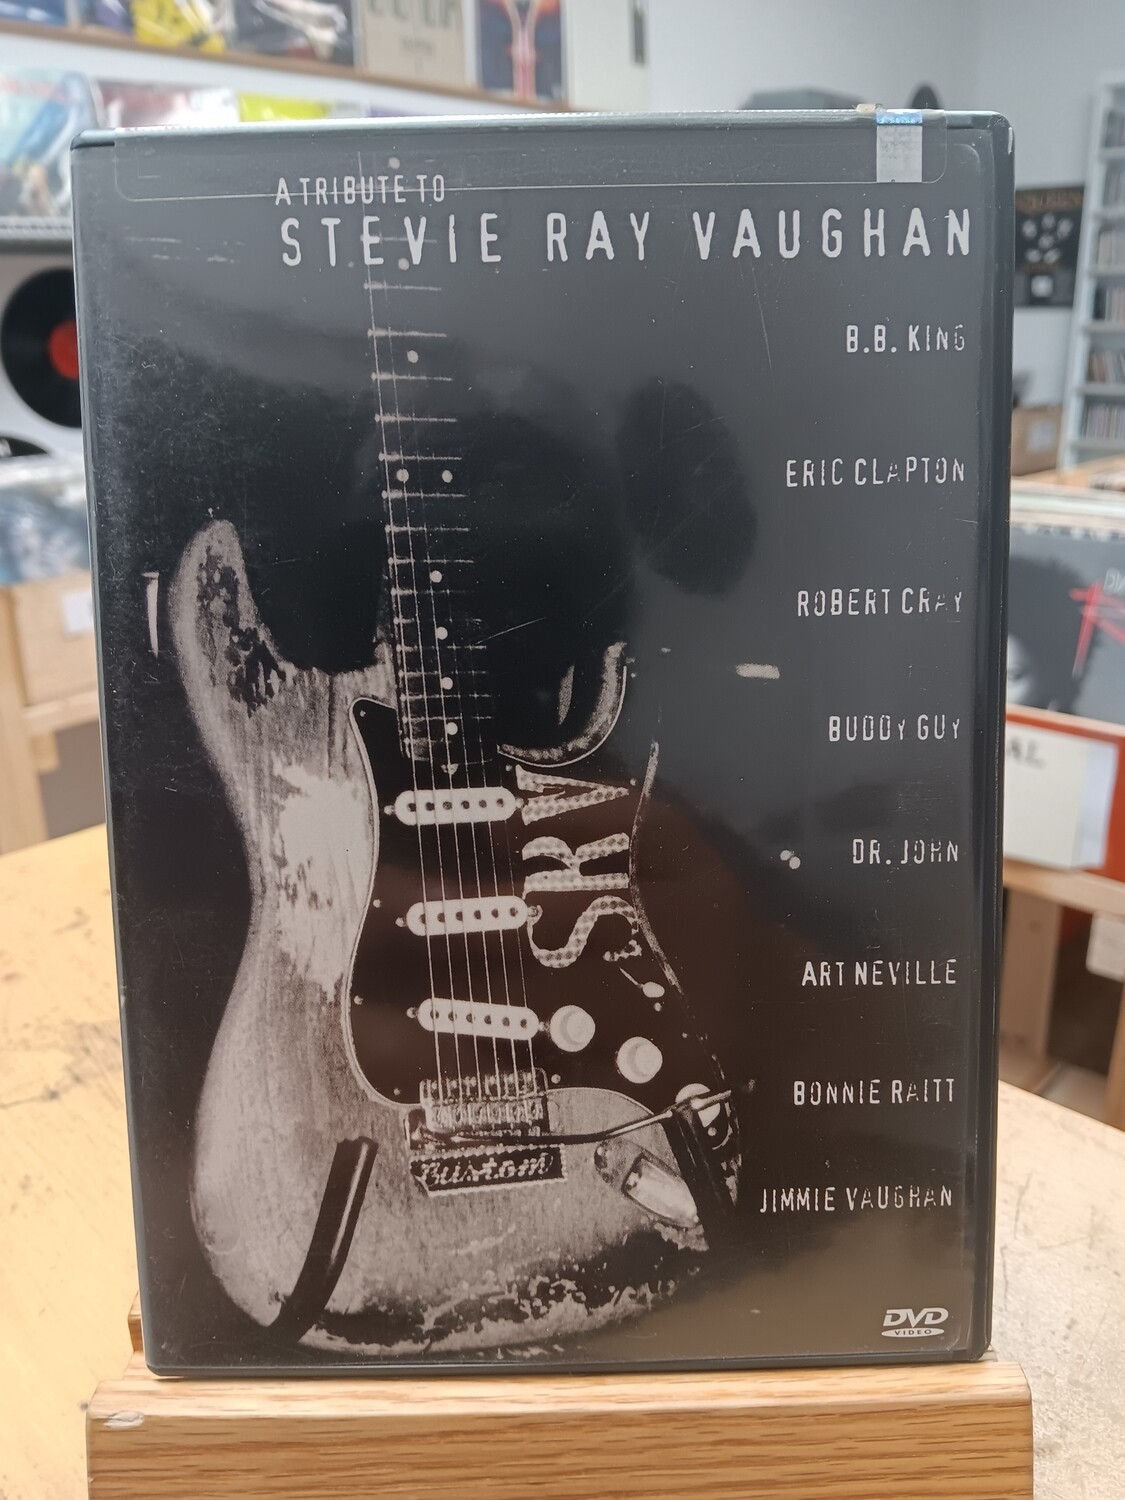 VARIOUS - A Tribute to Stevie Ray Vaughan (DVD)